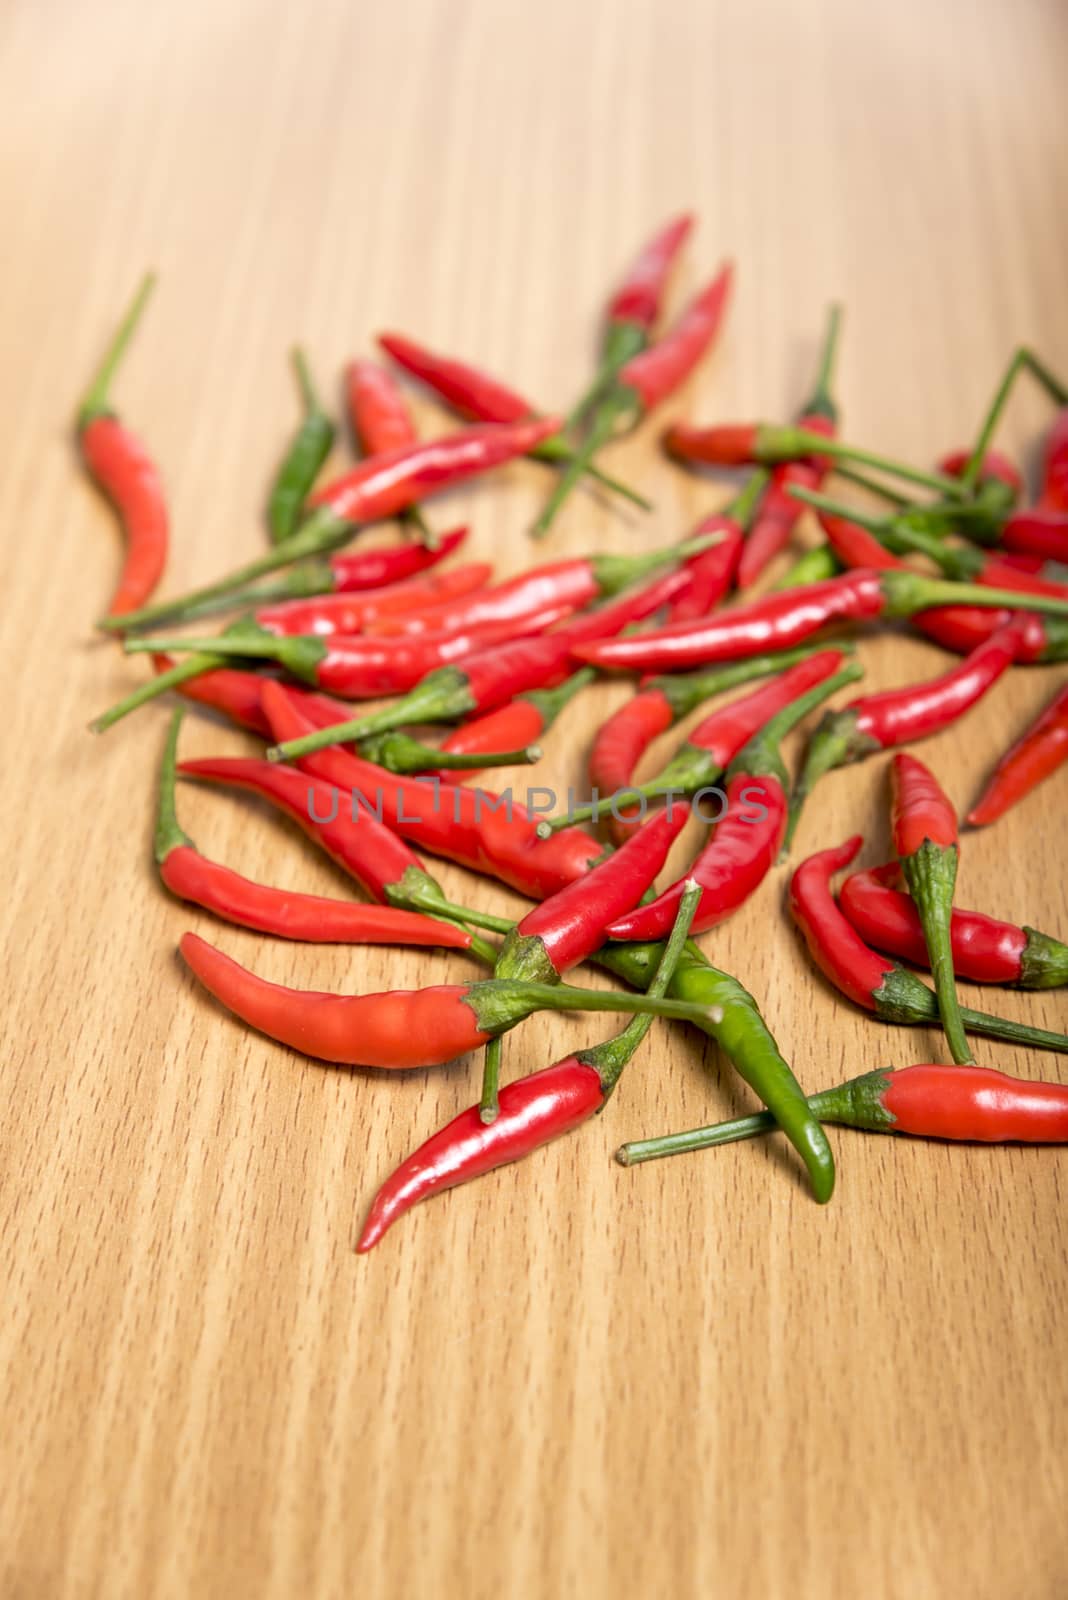 red chili peppers on wood table background